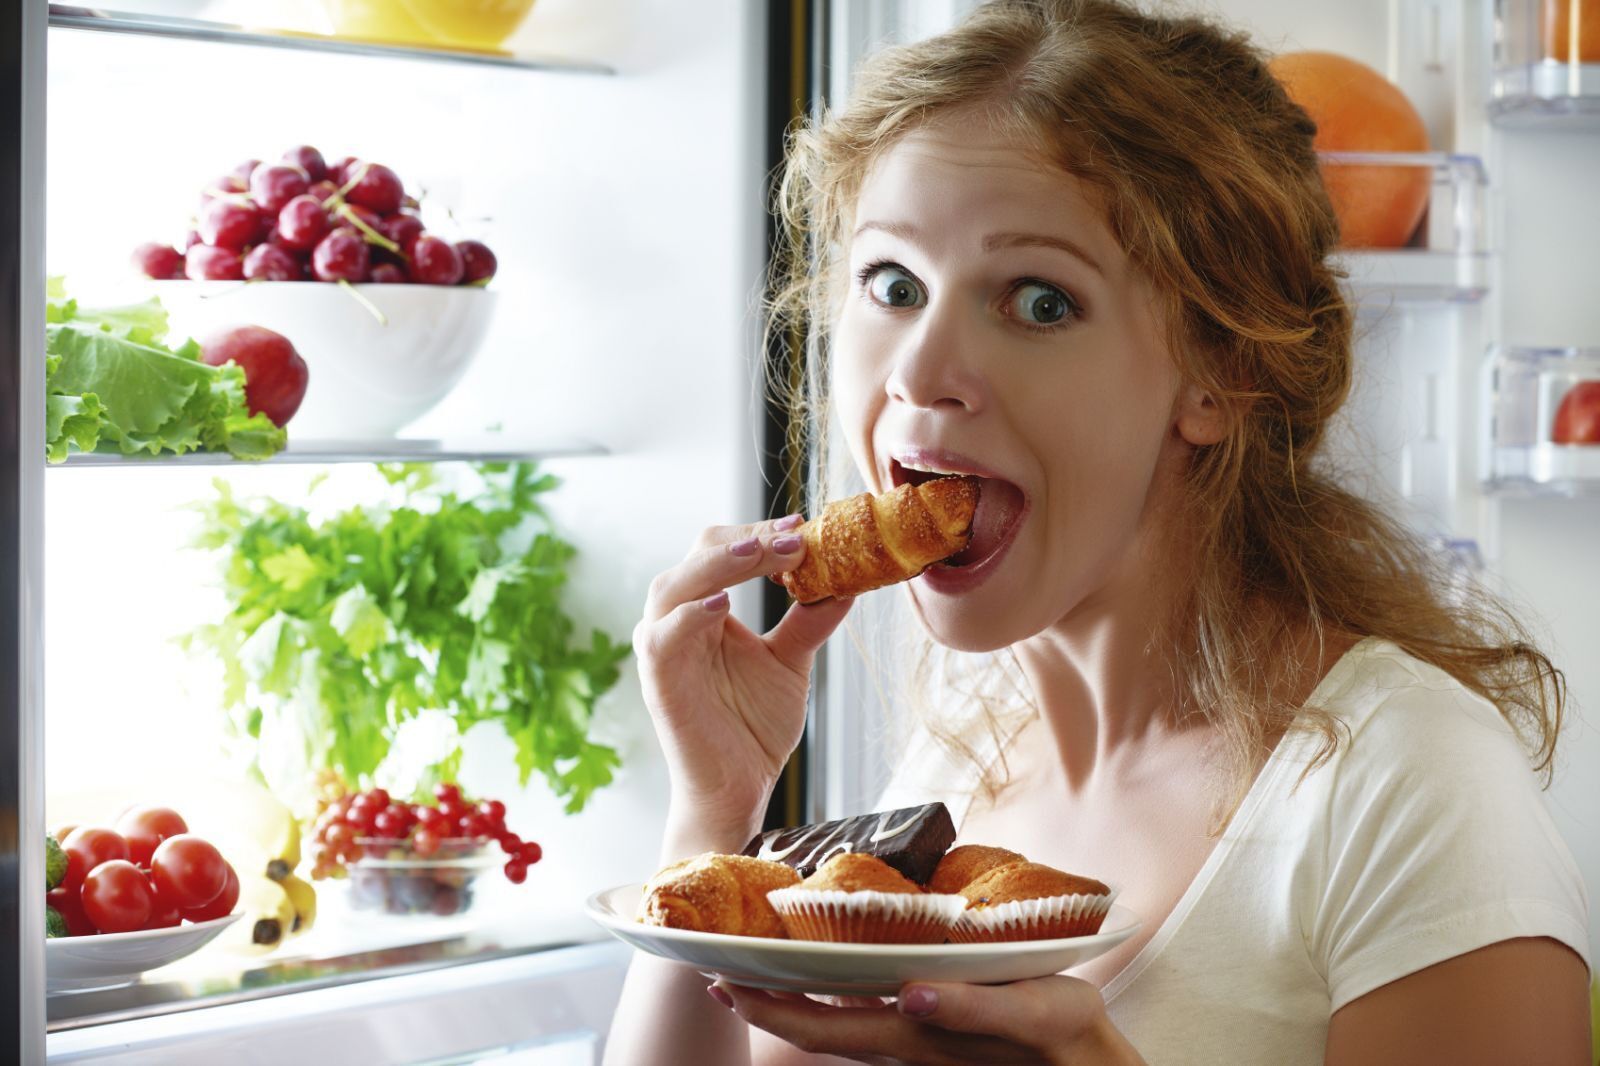 The worst eating habits everyone has: you are just harming your body